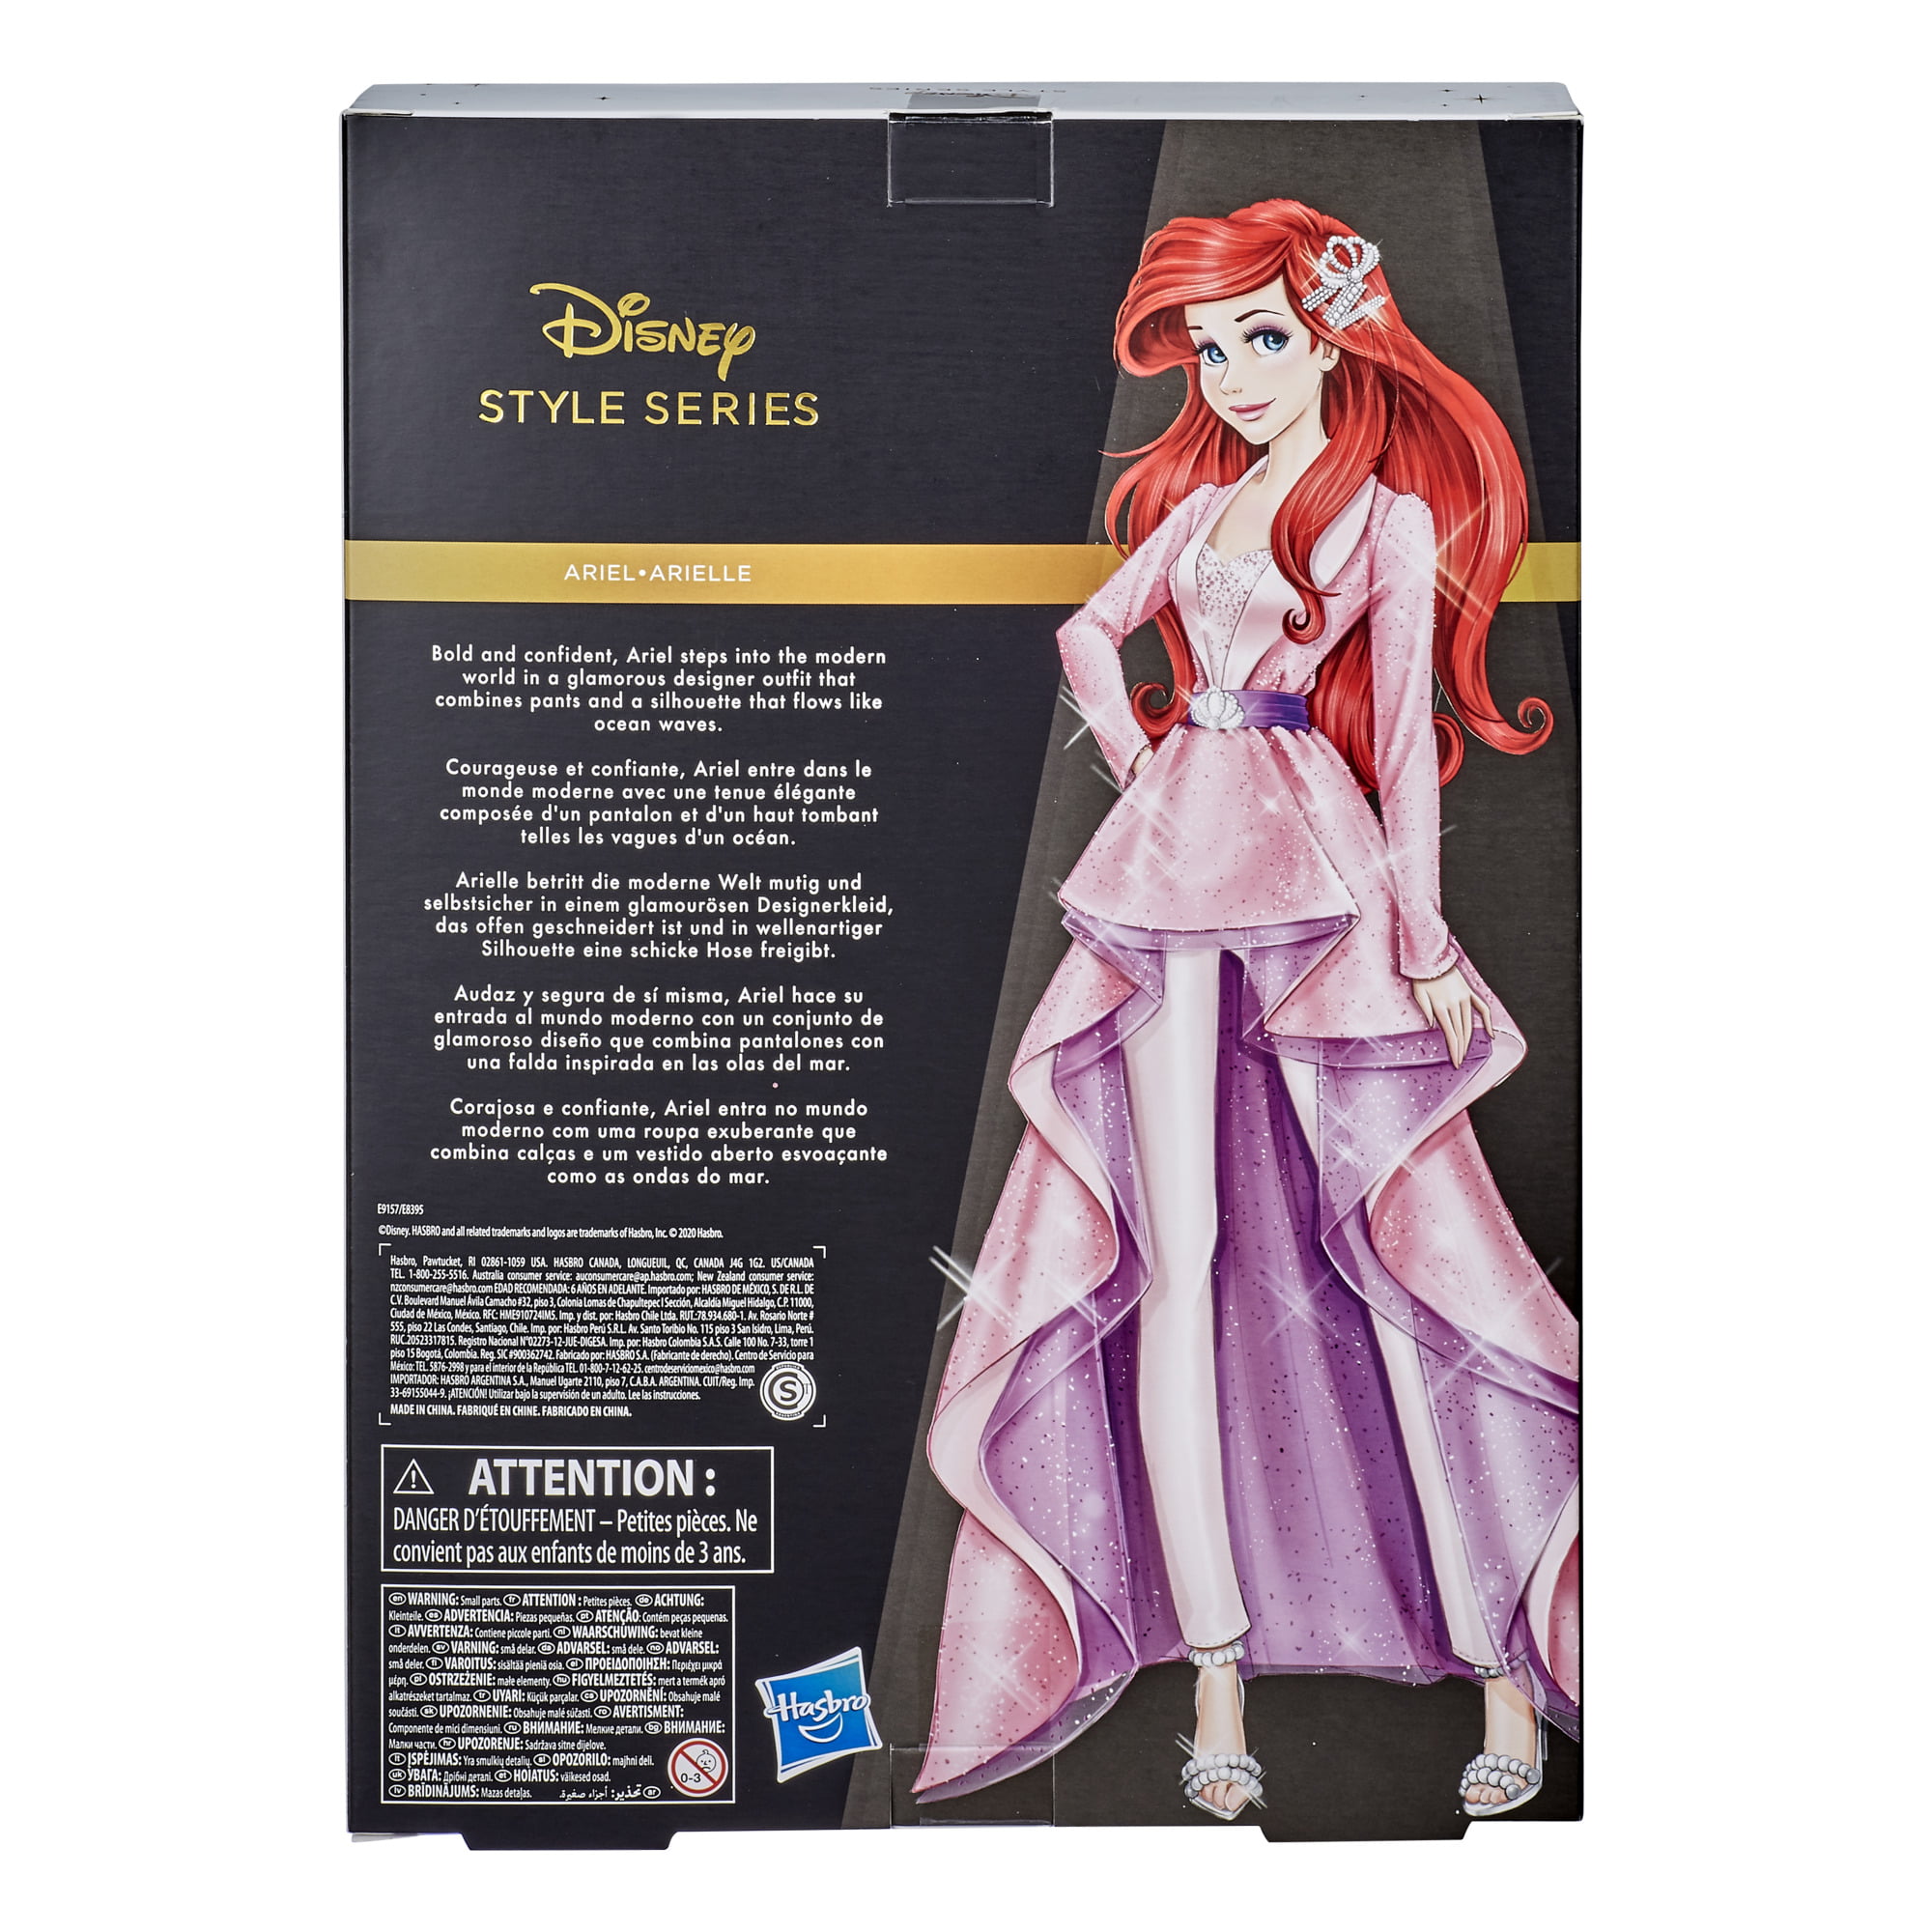 New Disney Princess Style Series Ariel Fashion Doll Collectable 